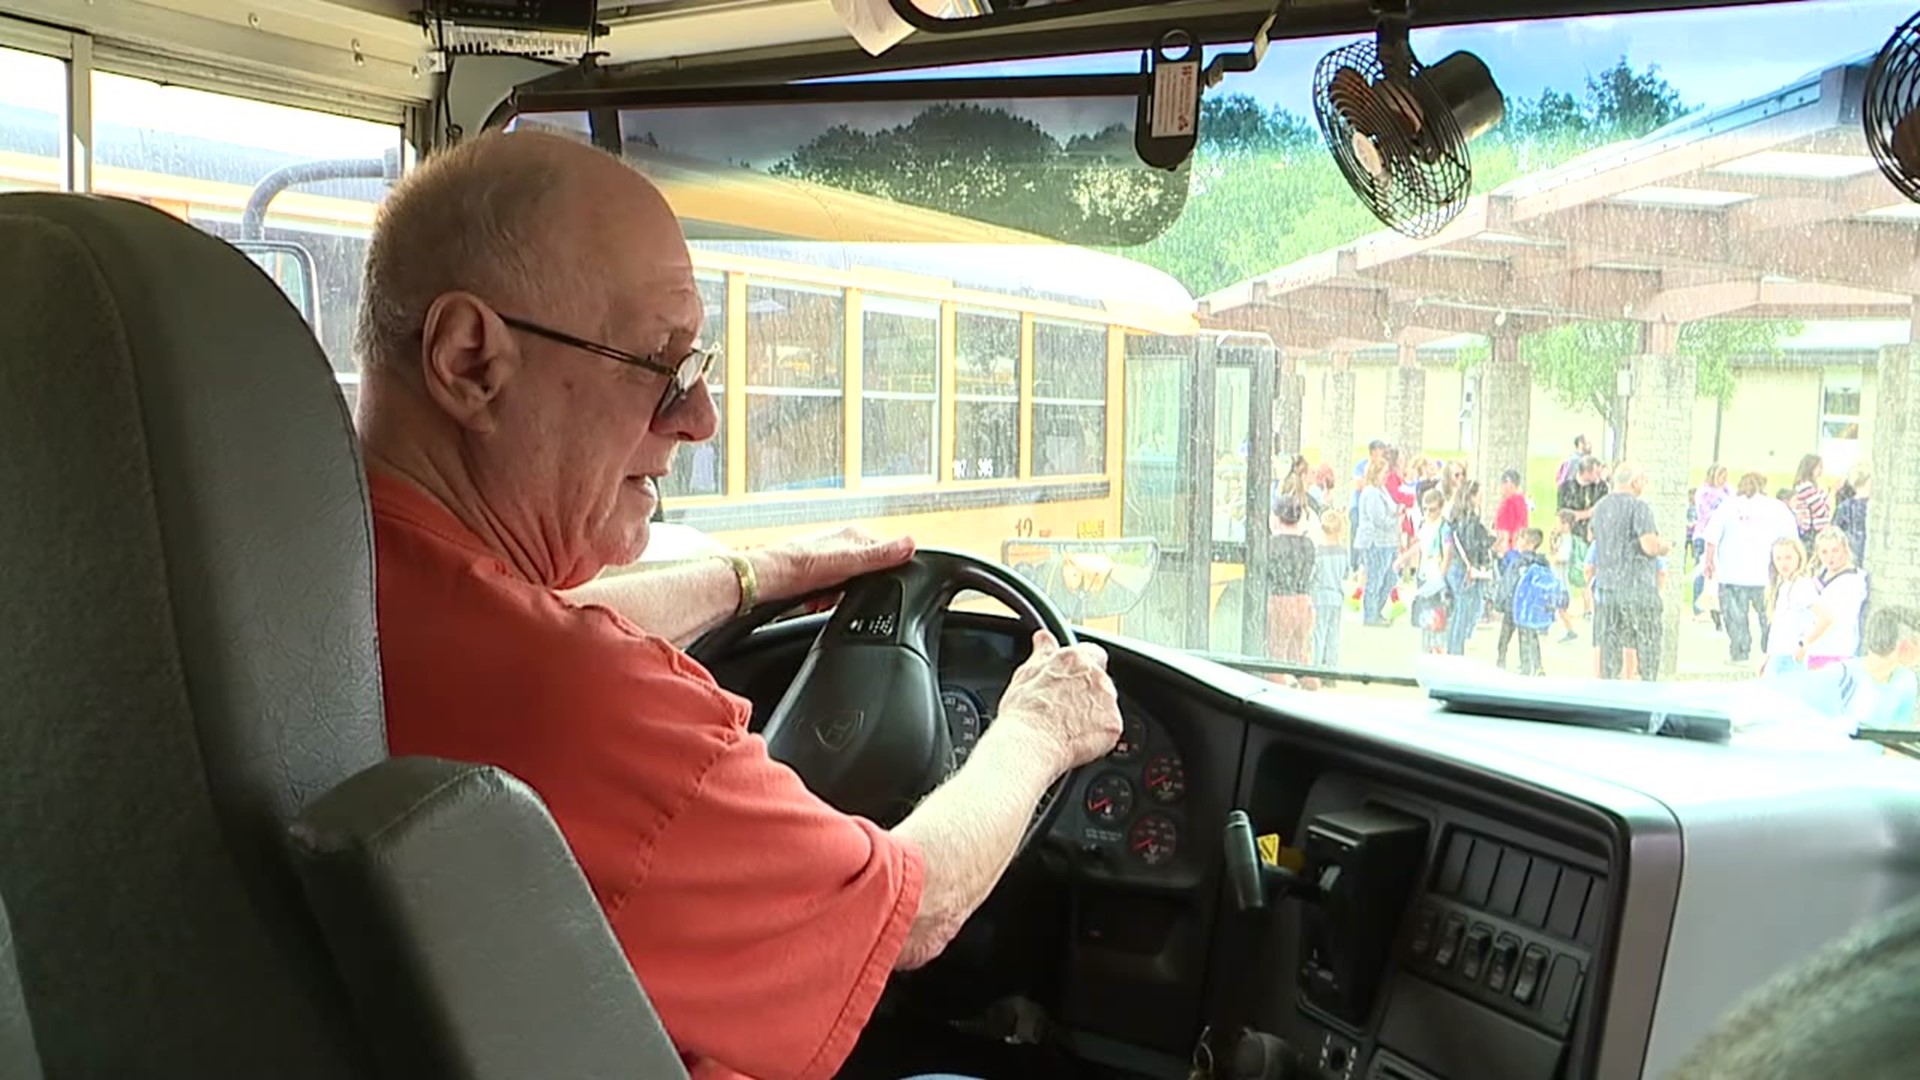 After decades of driving students in the Back Mountain, it's time to say farewell. Newswatch 16's Emily Kress shows us the final send-off for a well-known driver.